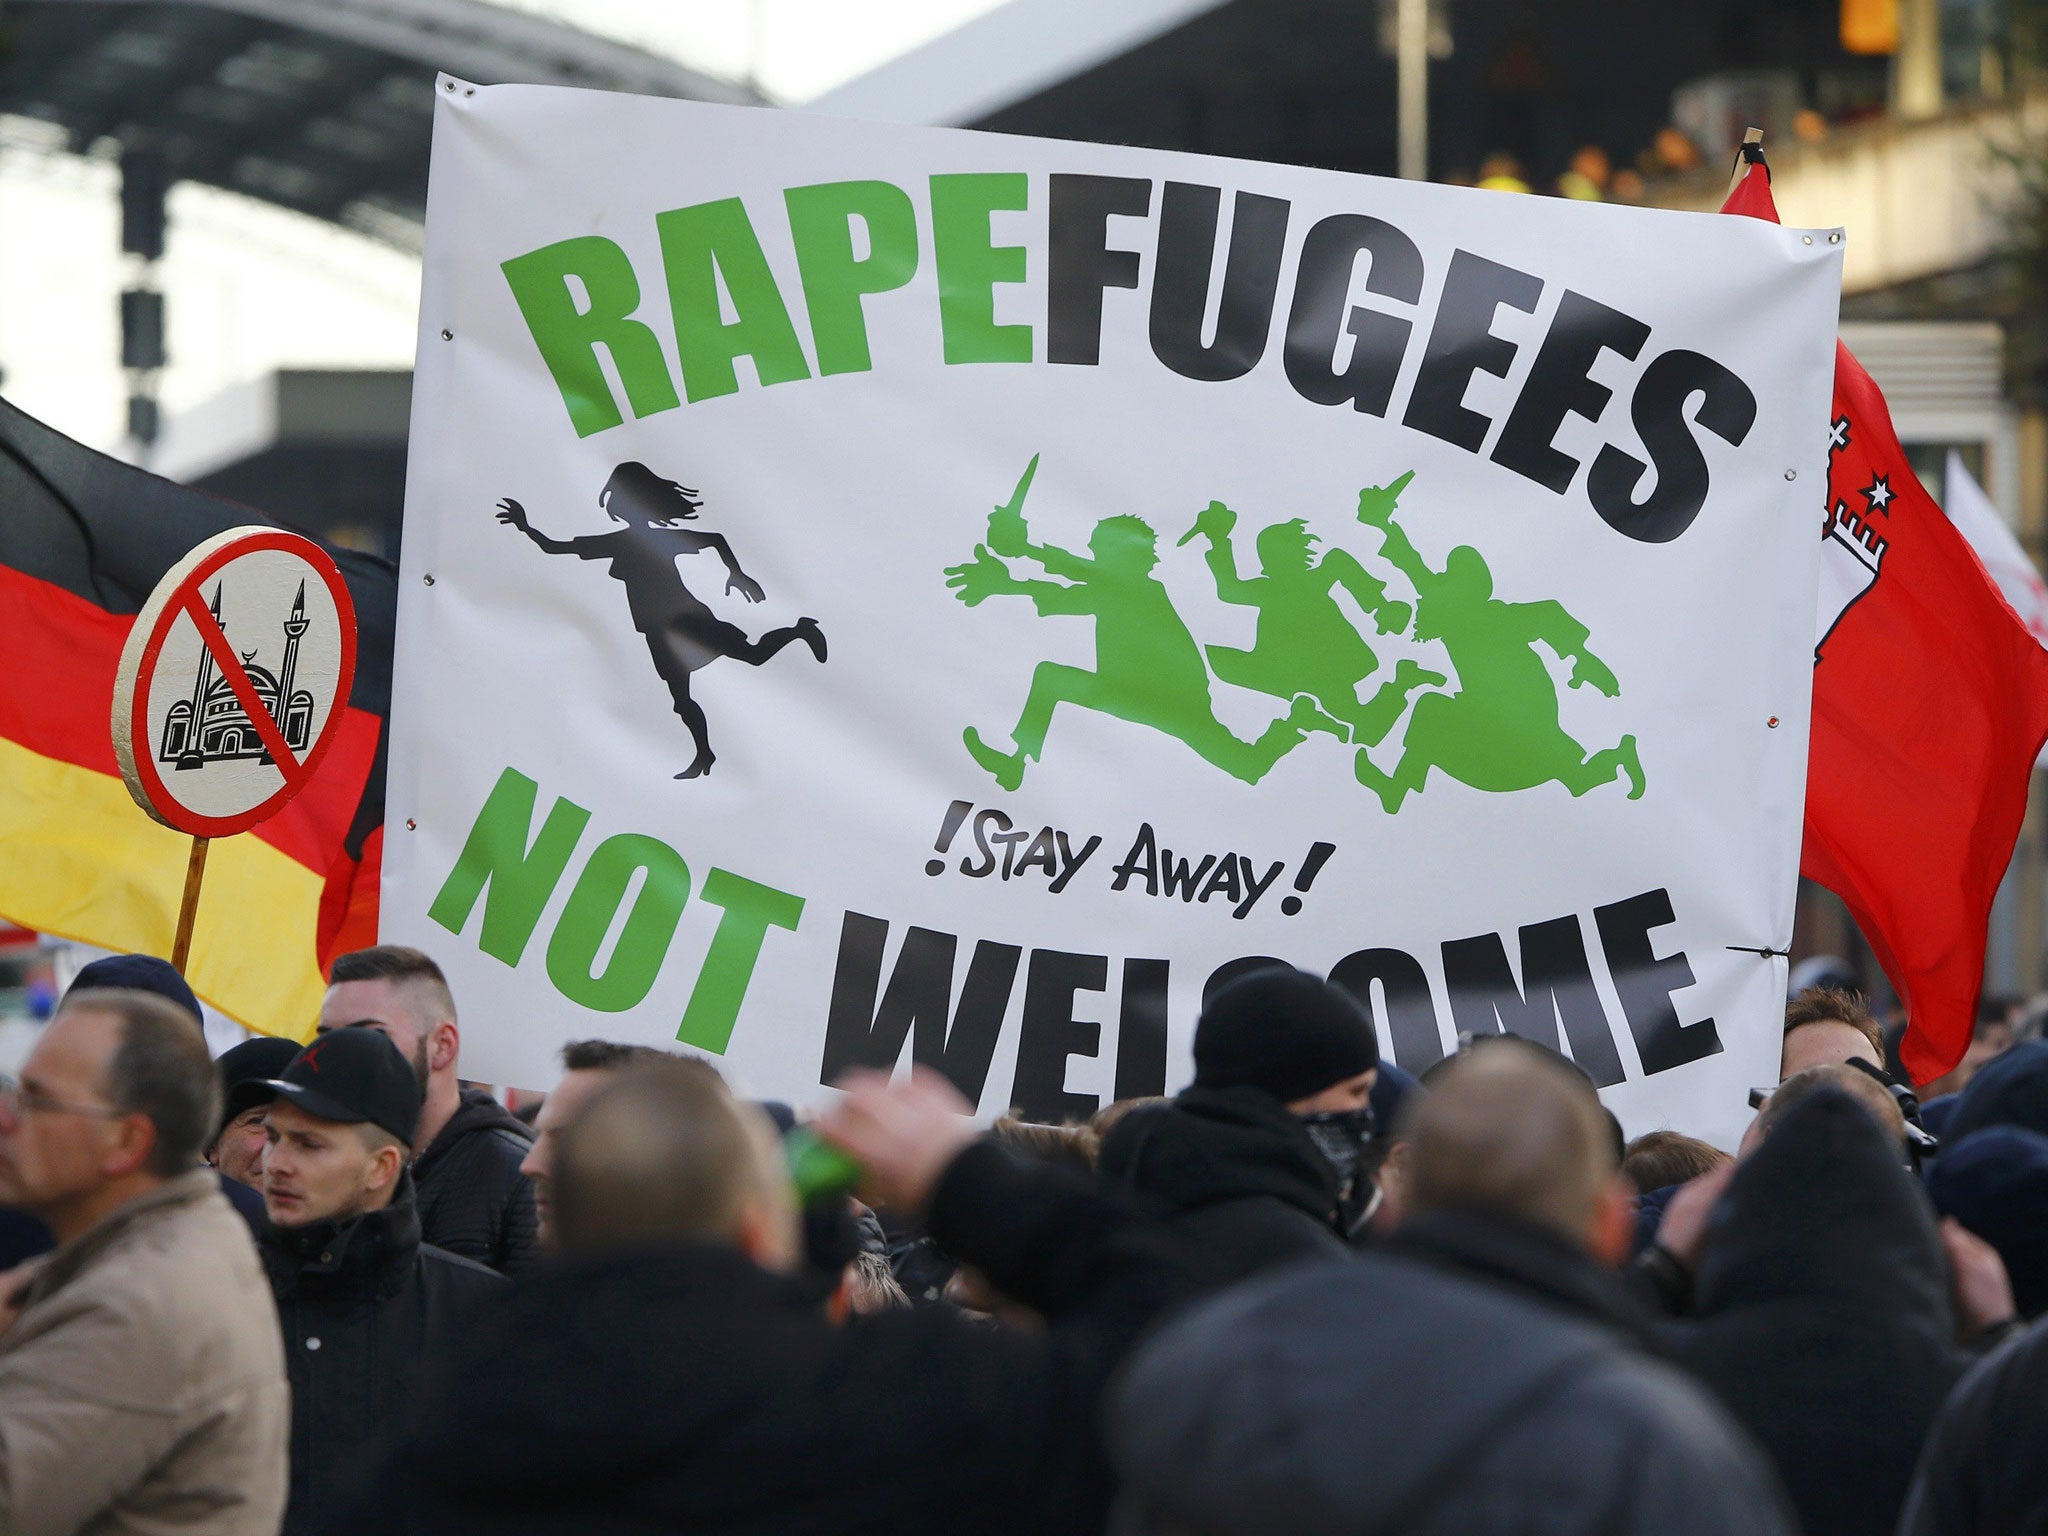 Far-right groups have claimed the arrival of refugees is putting German women at risk